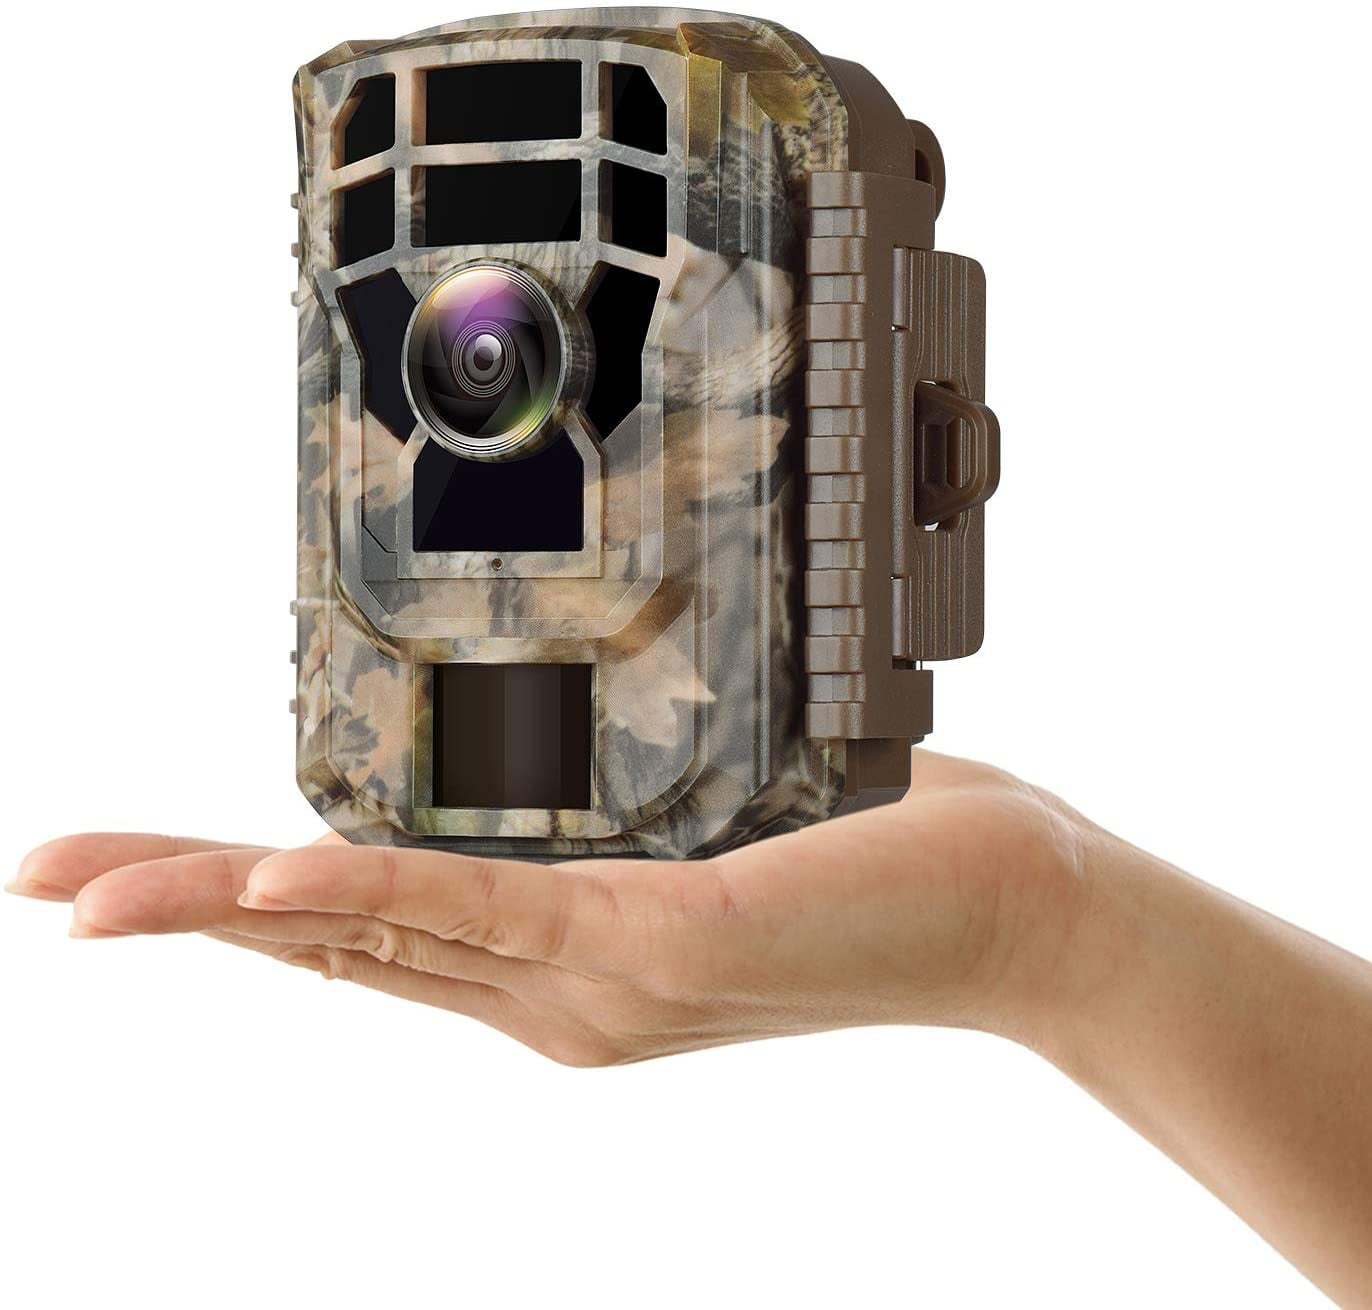 Campark Trail Camera Review